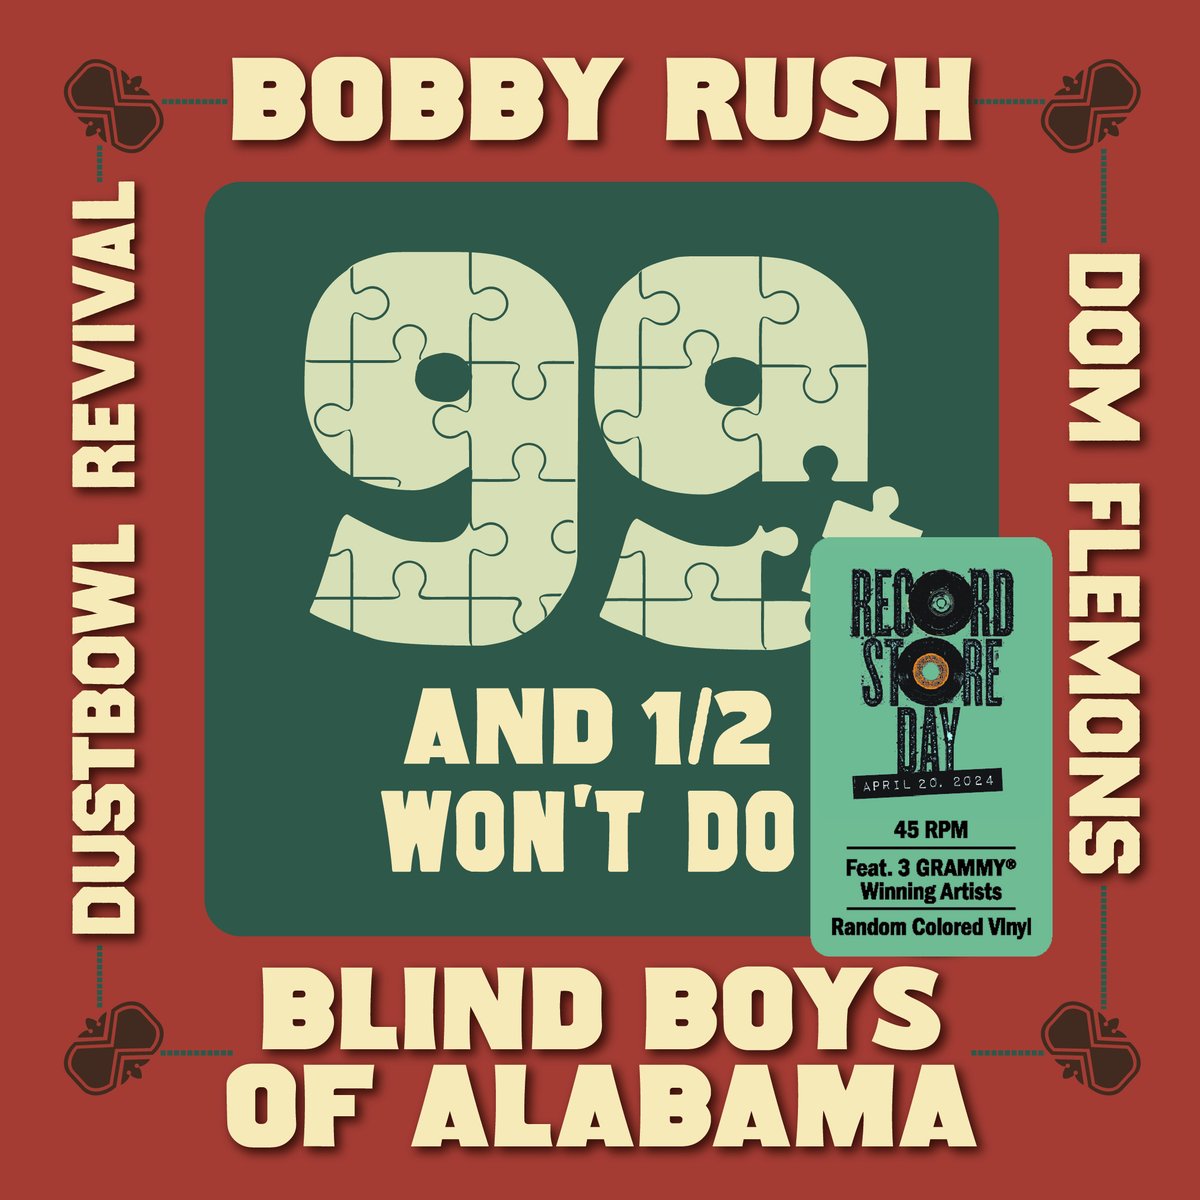 Tomorrow is Record Store Day! One of the coolest things I’ve done is record a song with my friends from the Blind Boys of Alabama. It’s out on Limited Edition vinyl on April 20 in indie record stores across the U.S. and Europe. @recordstoreday #RSD2024 #RSD24 #RecordStoreDay2024